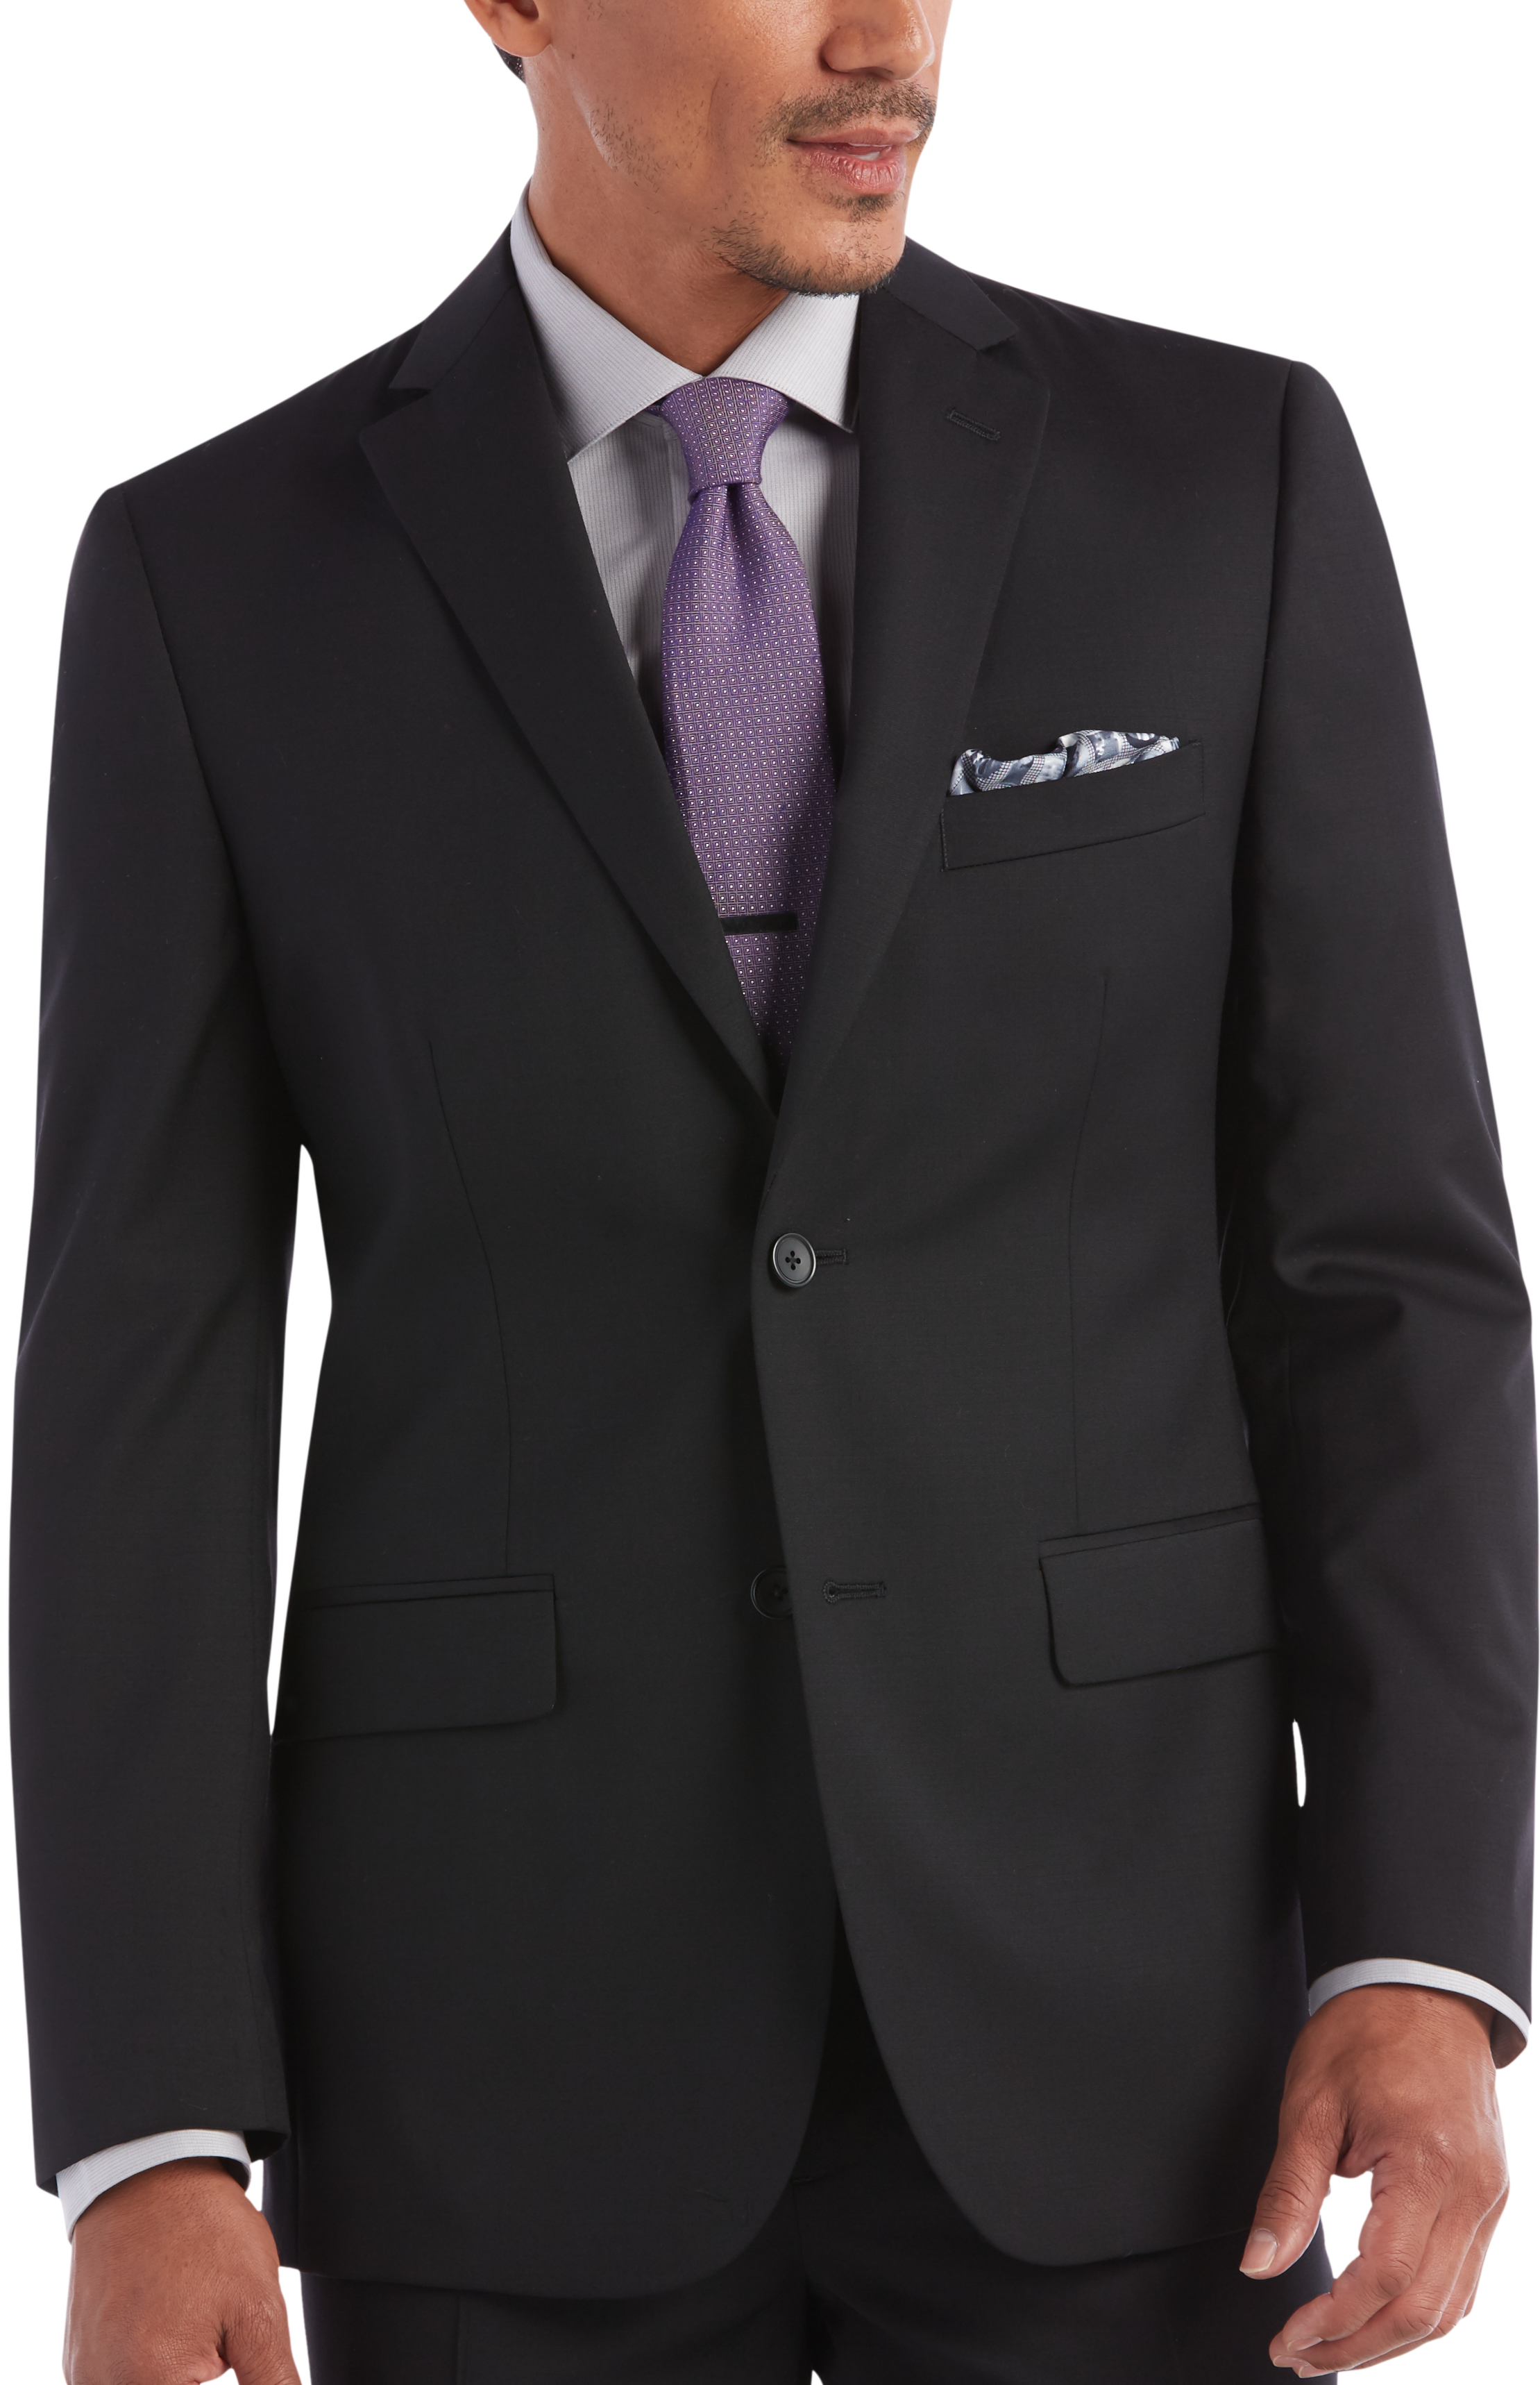 100% Wool Black Slim Fit Suit - Men's Suits - Awearness Kenneth Cole ...